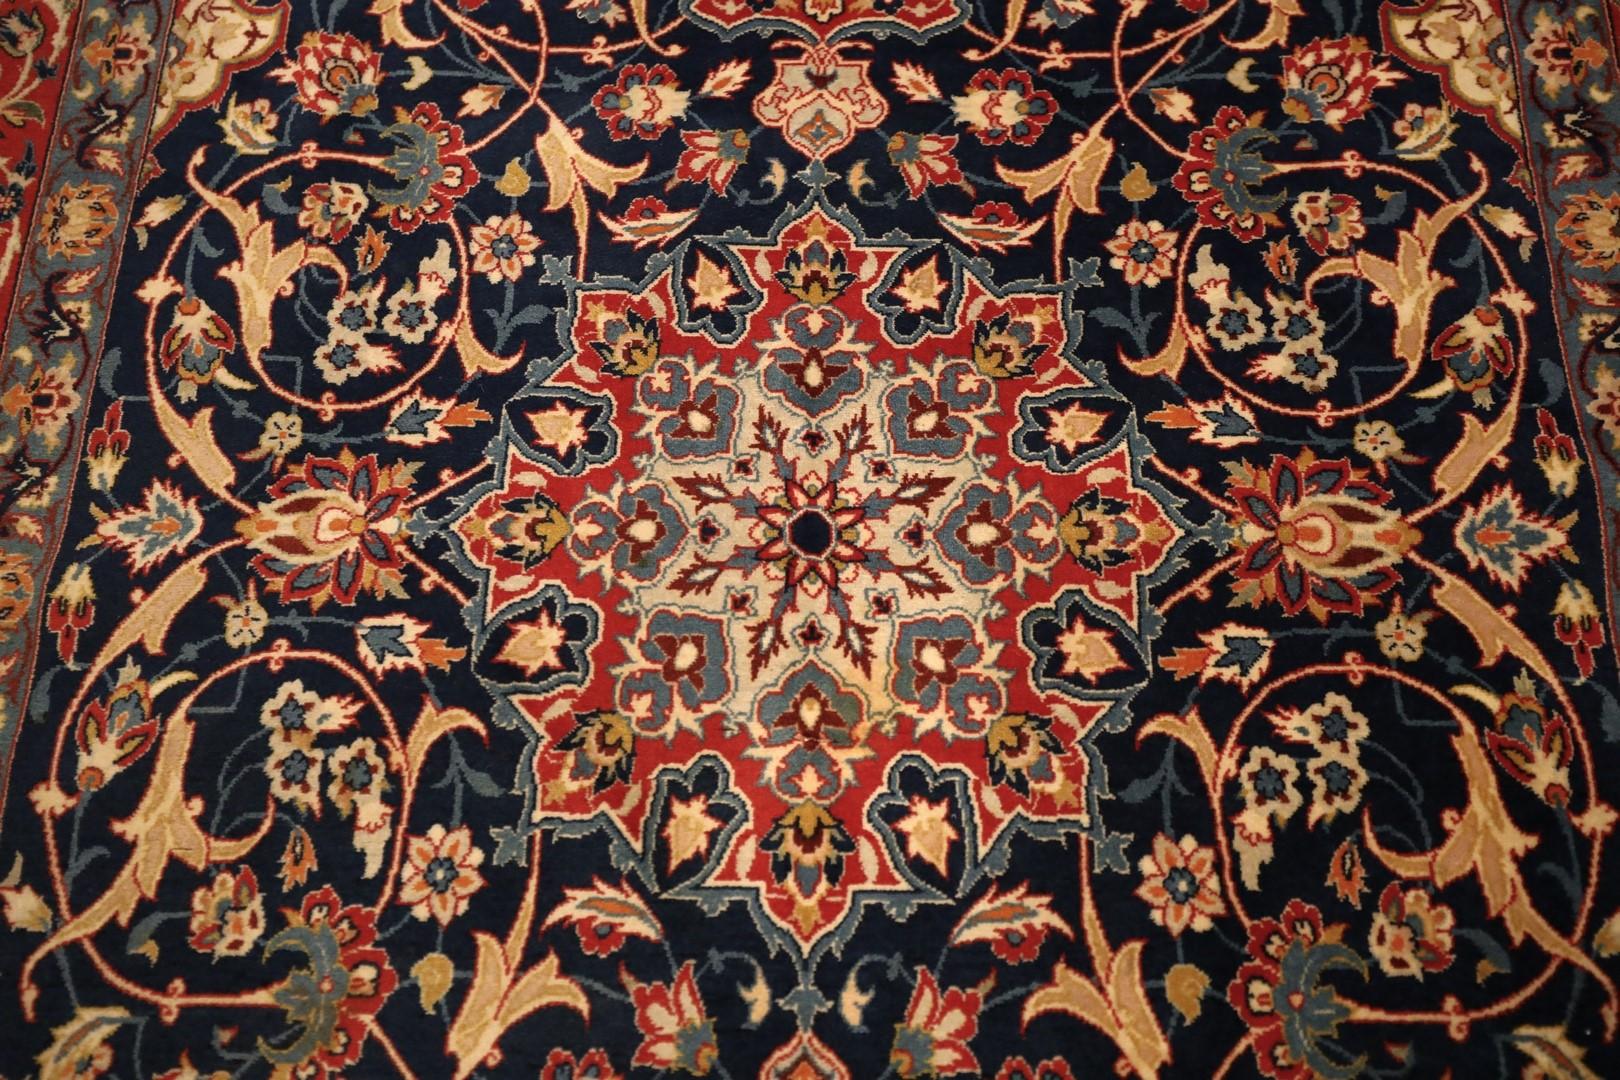 Isfahan Antique rug - 3'5